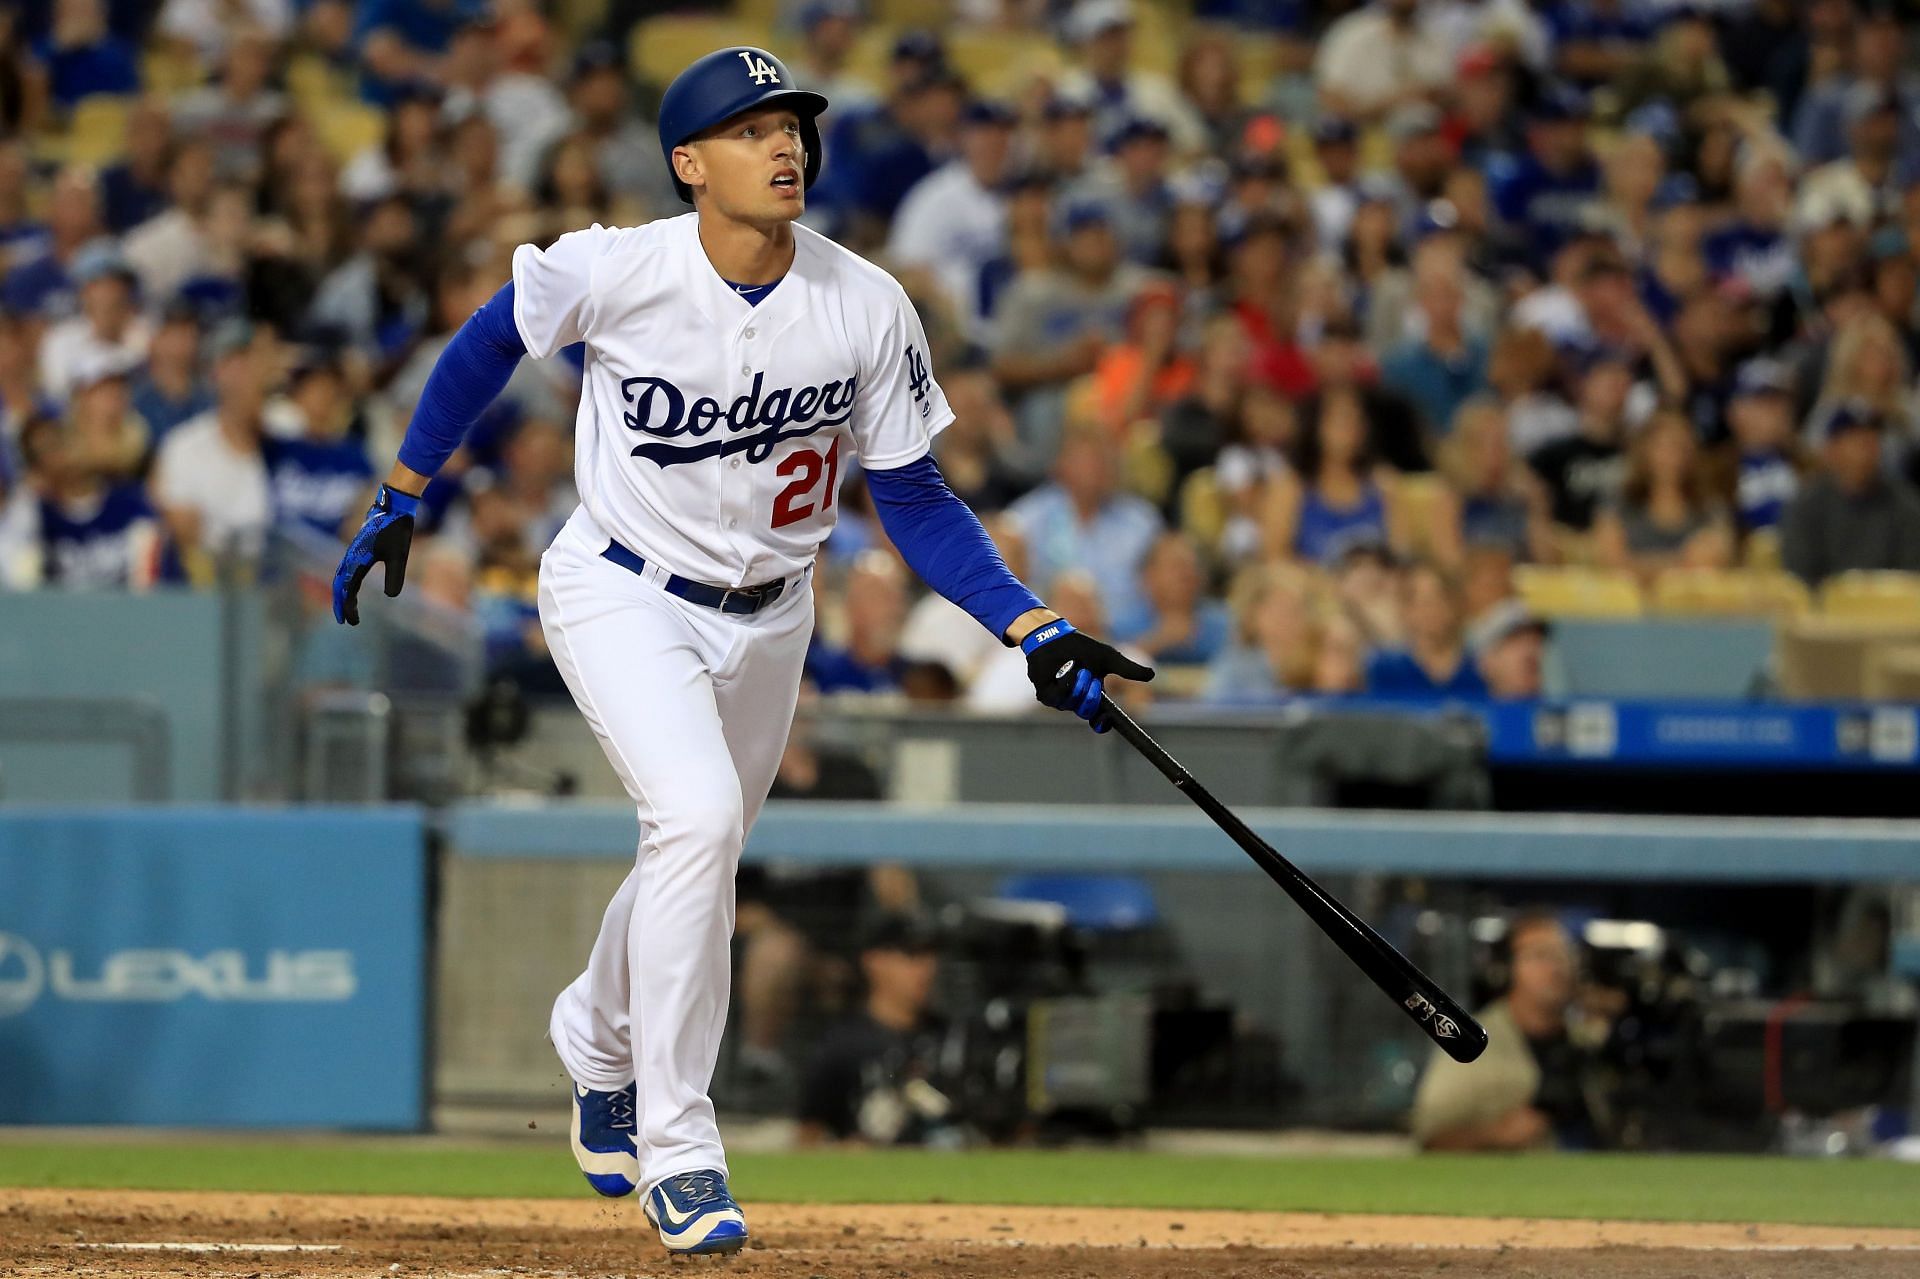 The Dodgers are acquiring outfielder Trayce Thompson from the